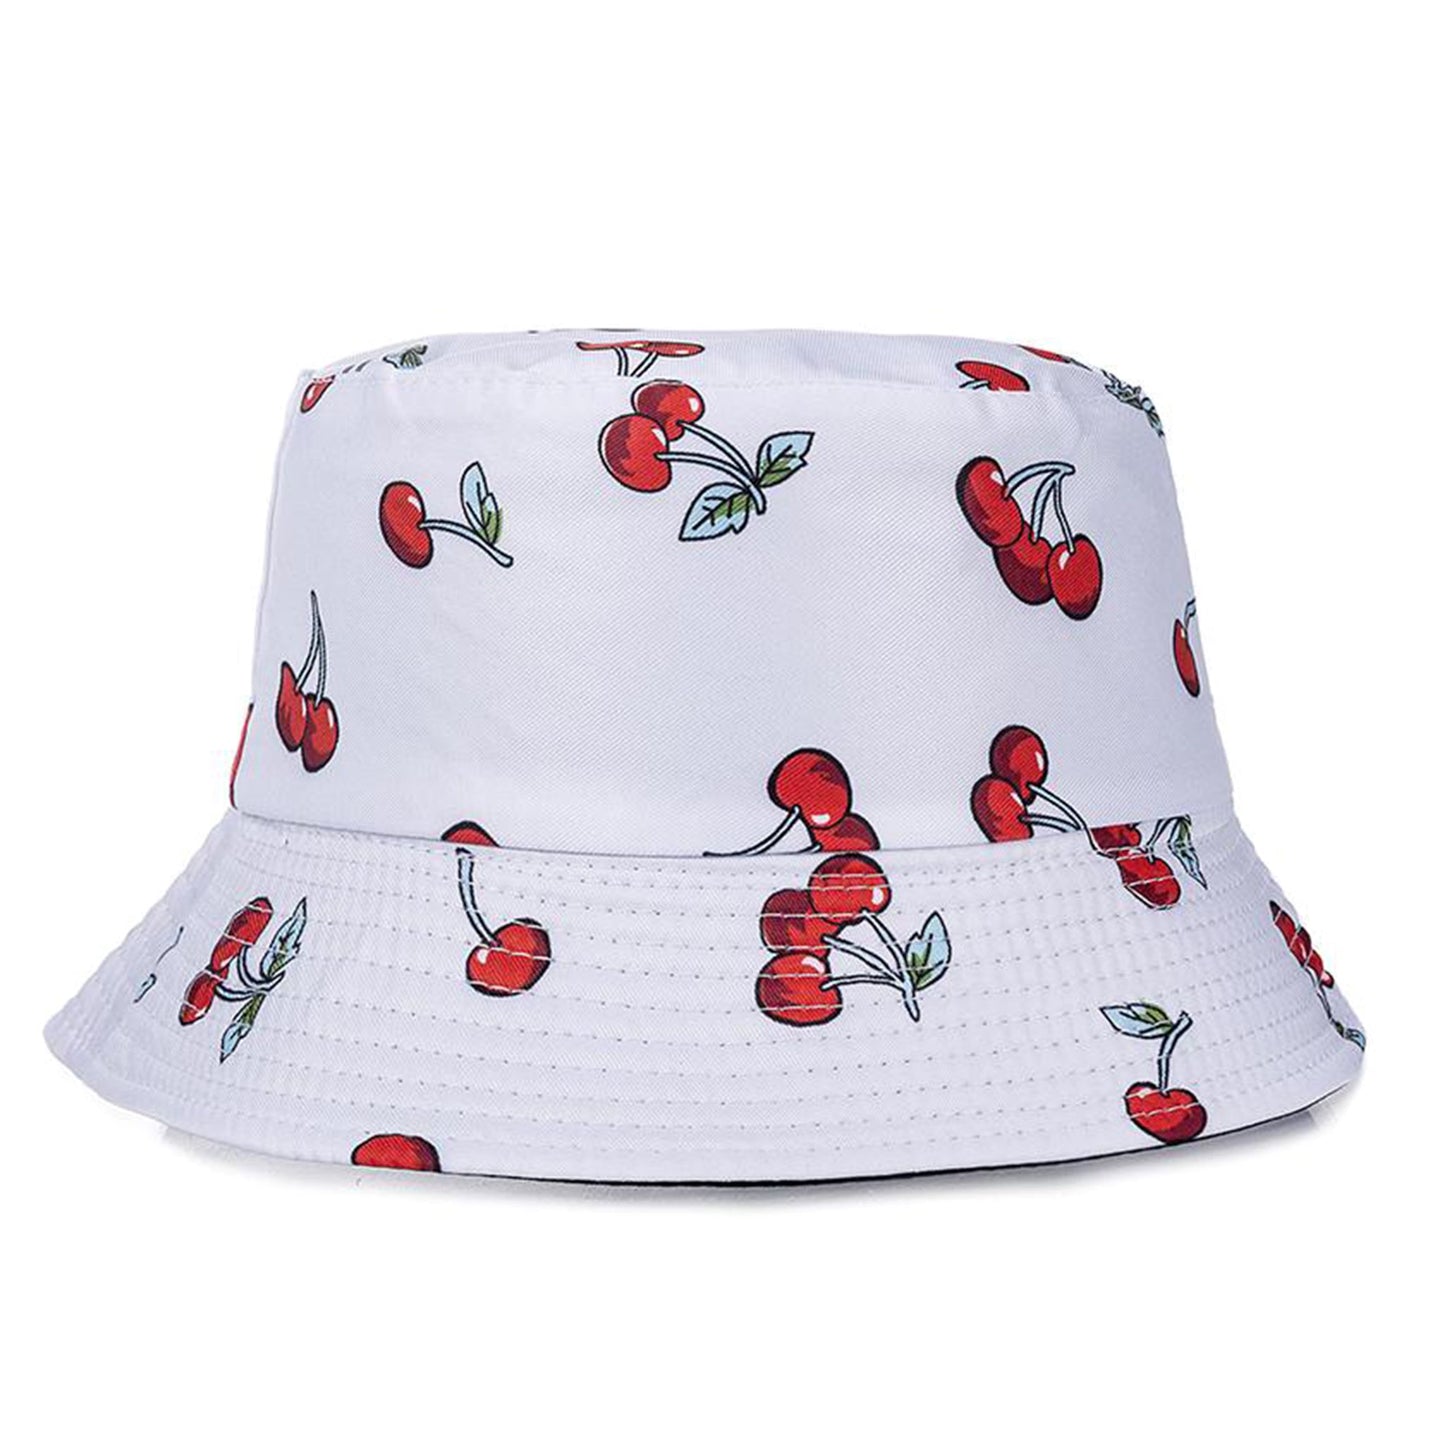 Bucket hat 100% cotton with reversible design, cherry white festival hat